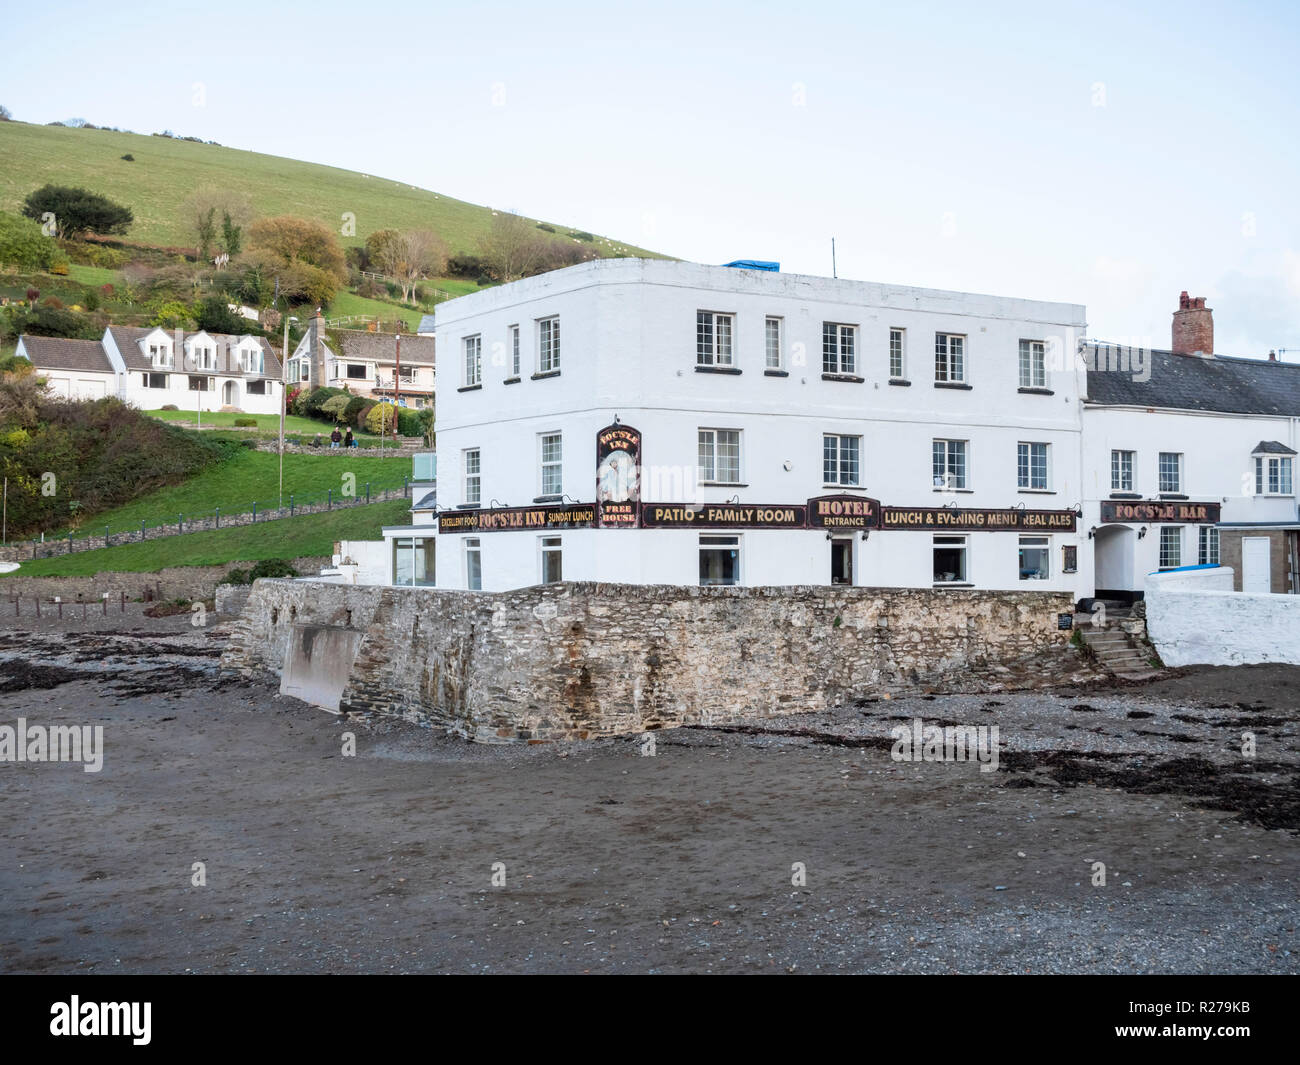 The Fo'c'sle Hotel  pub and restaurant on the beach at at Combe Martin Devon UK Stock Photo